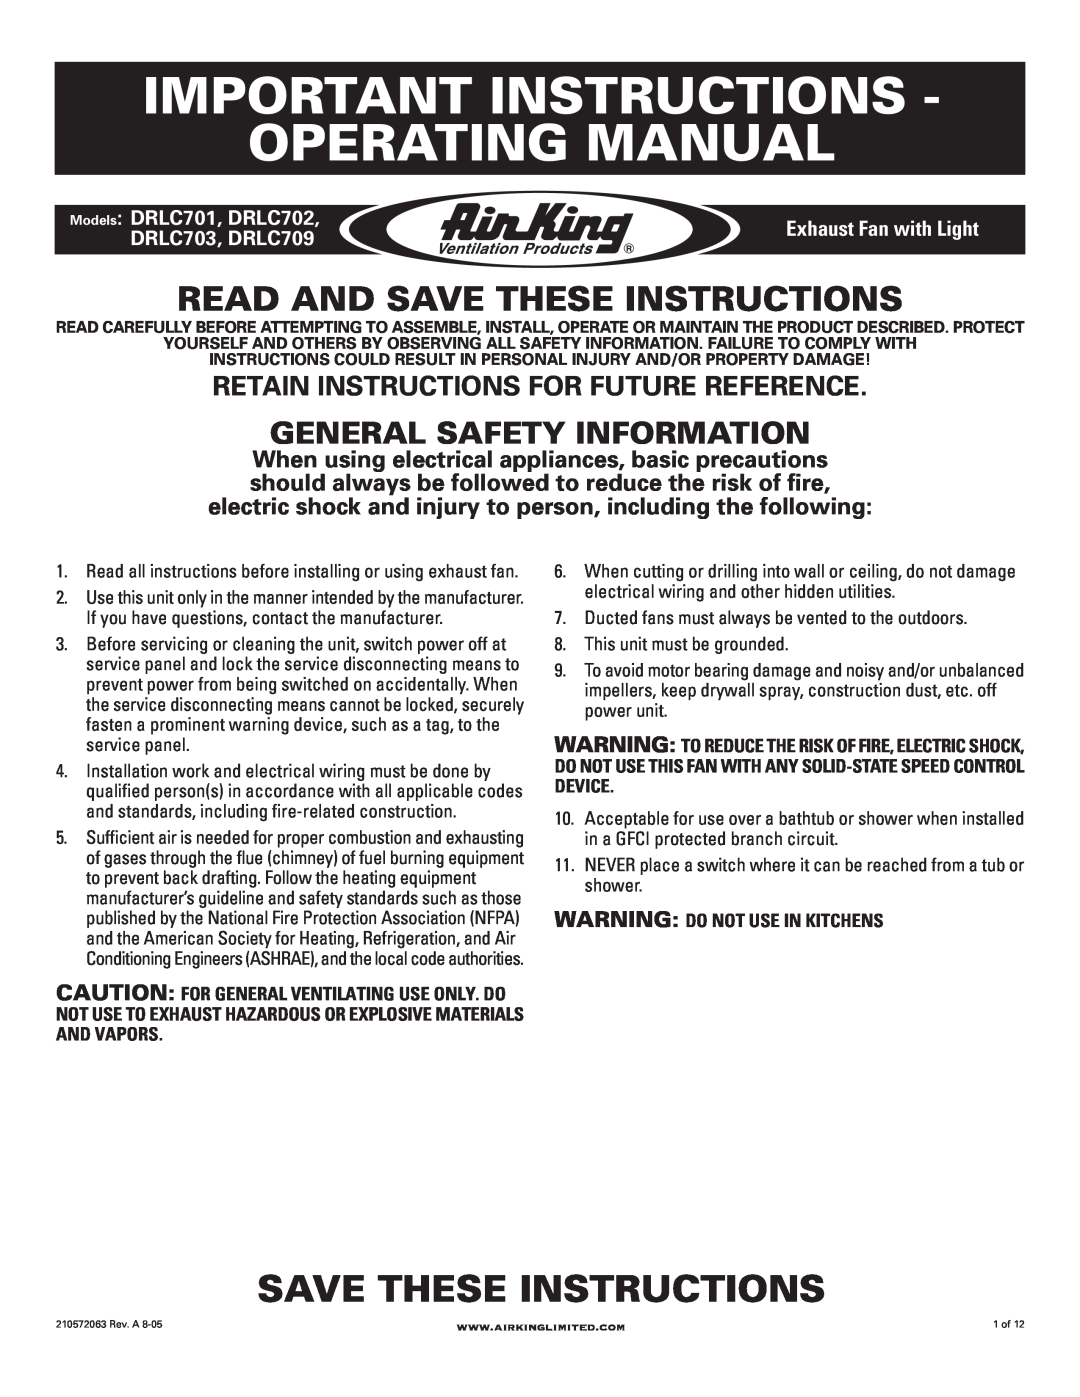 Air King DRLC701 manual Important Instructions Operating Manual, Read And Save These Instructions, DRLC703, DRLC709 